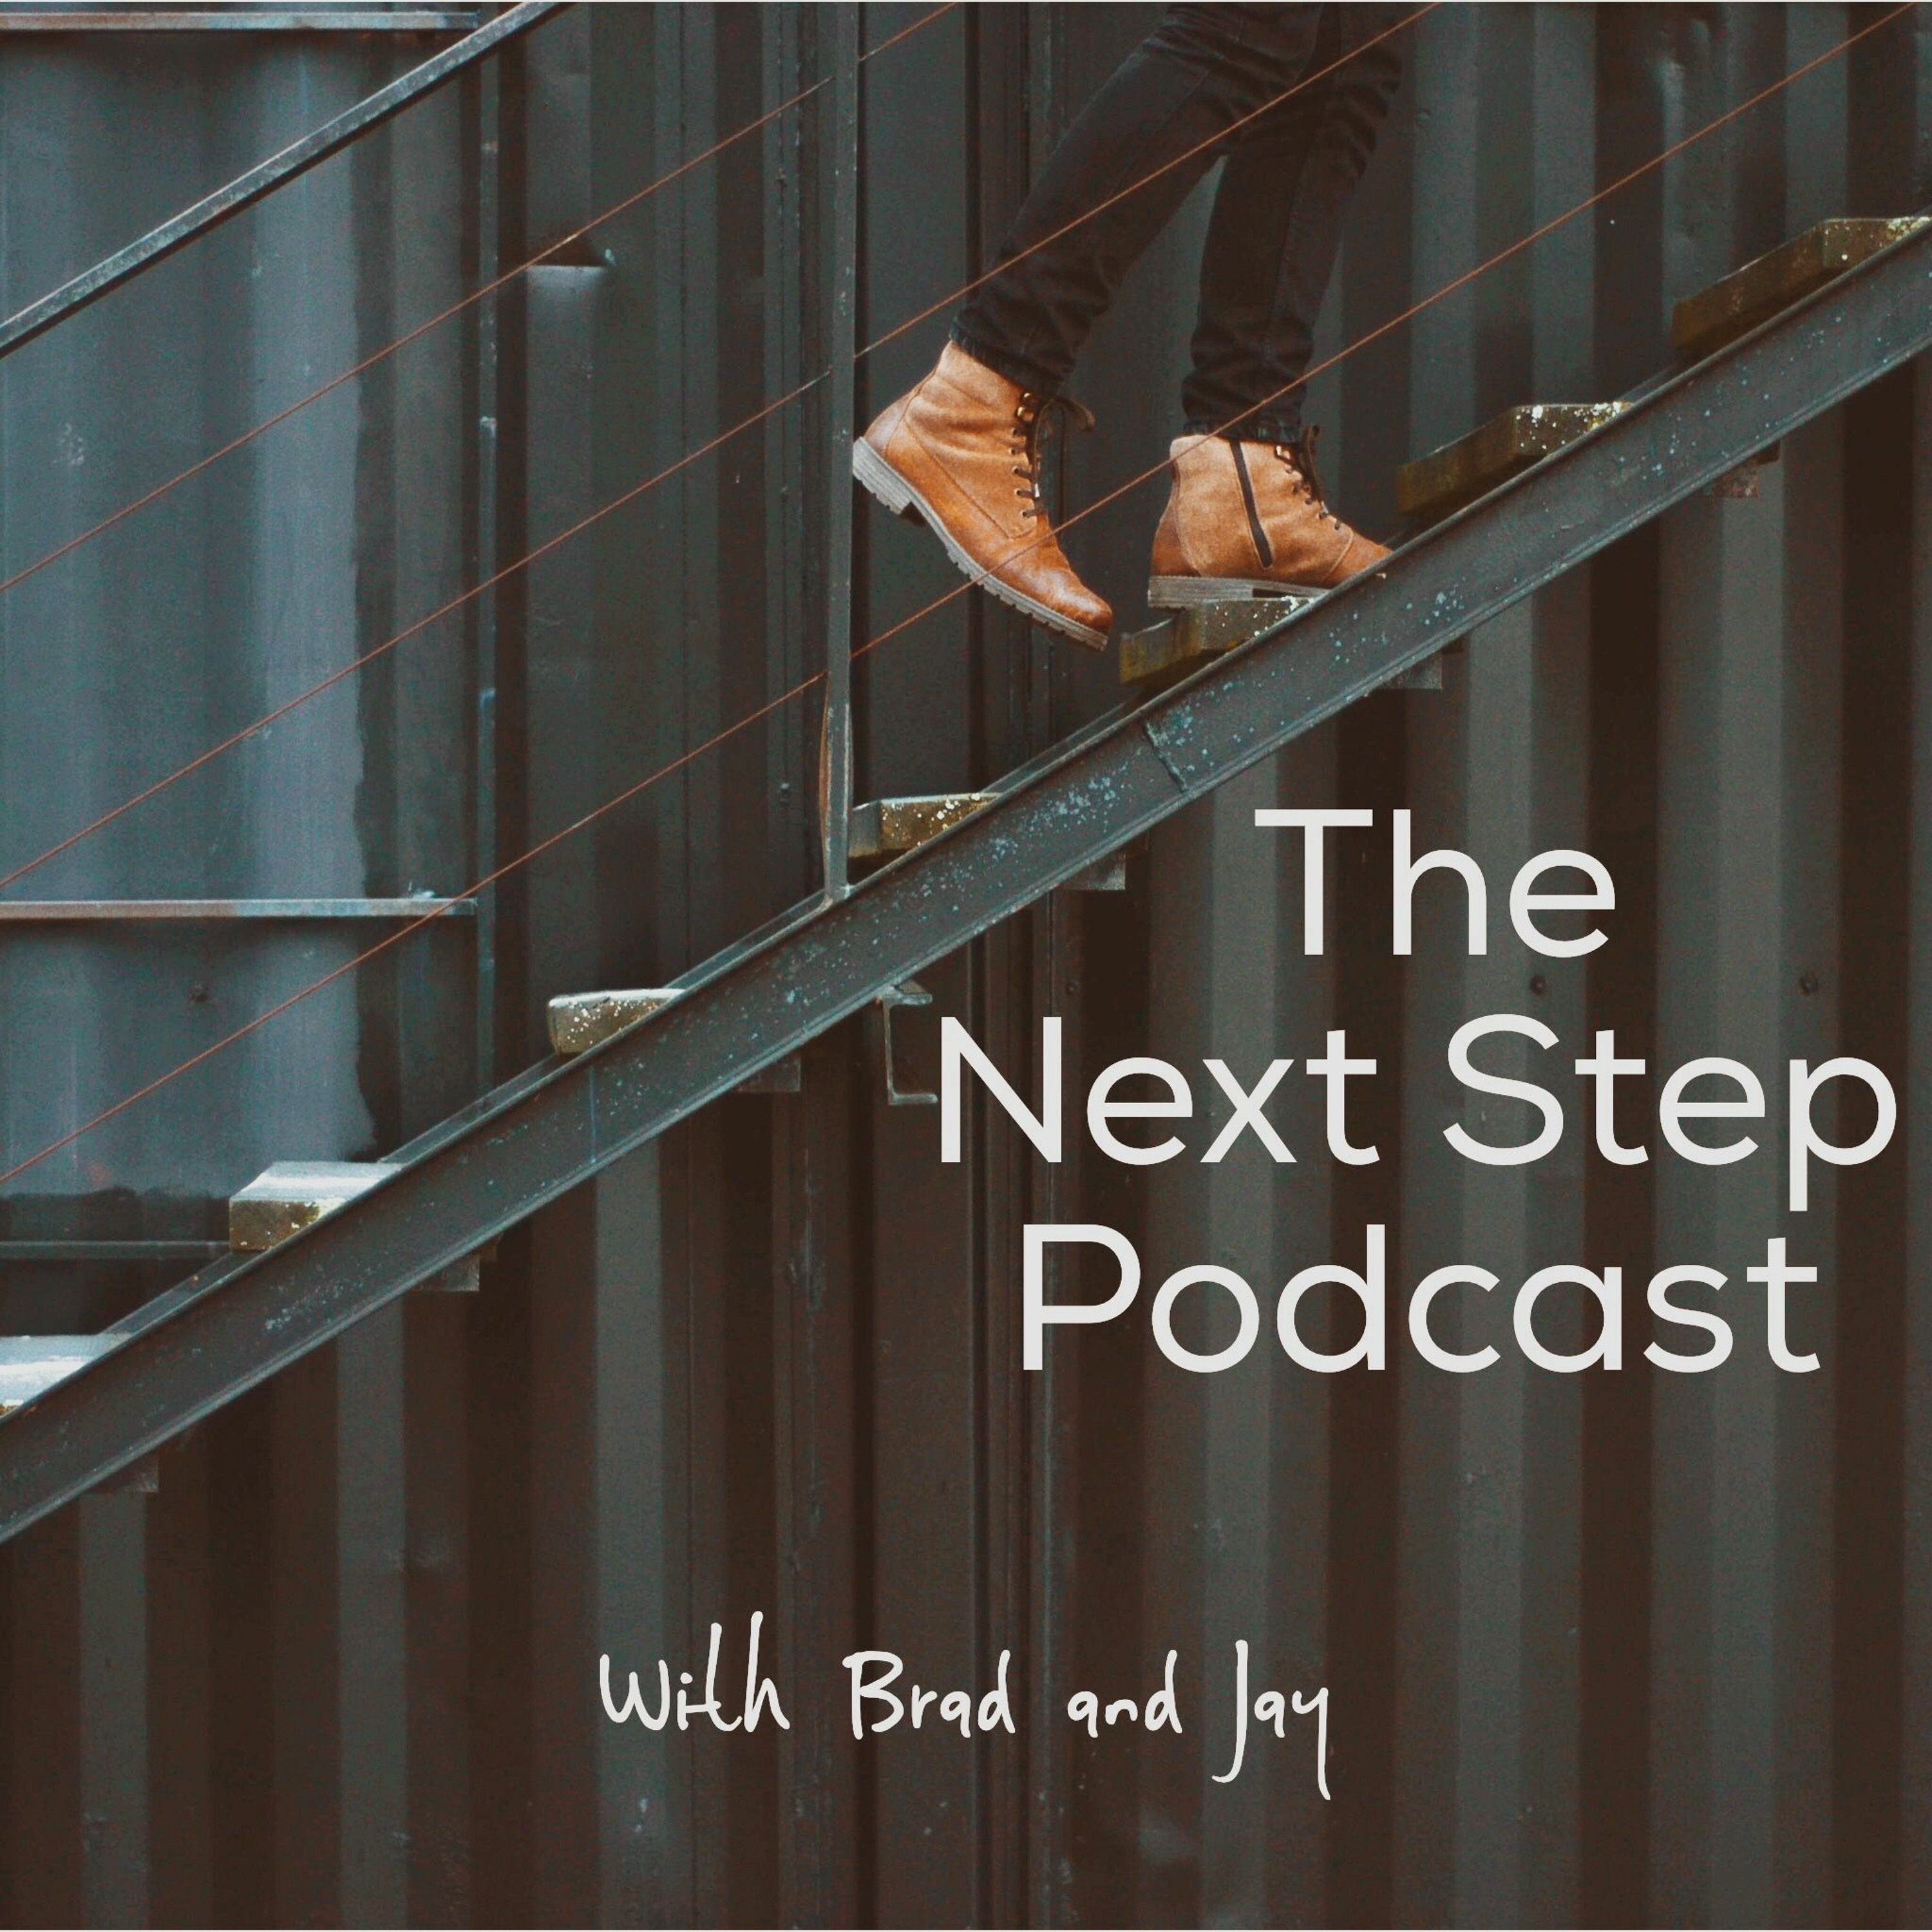 The next step pod 3.10 --> Daily Accountability--> Ask the spouse of a Porn/Sex Addict